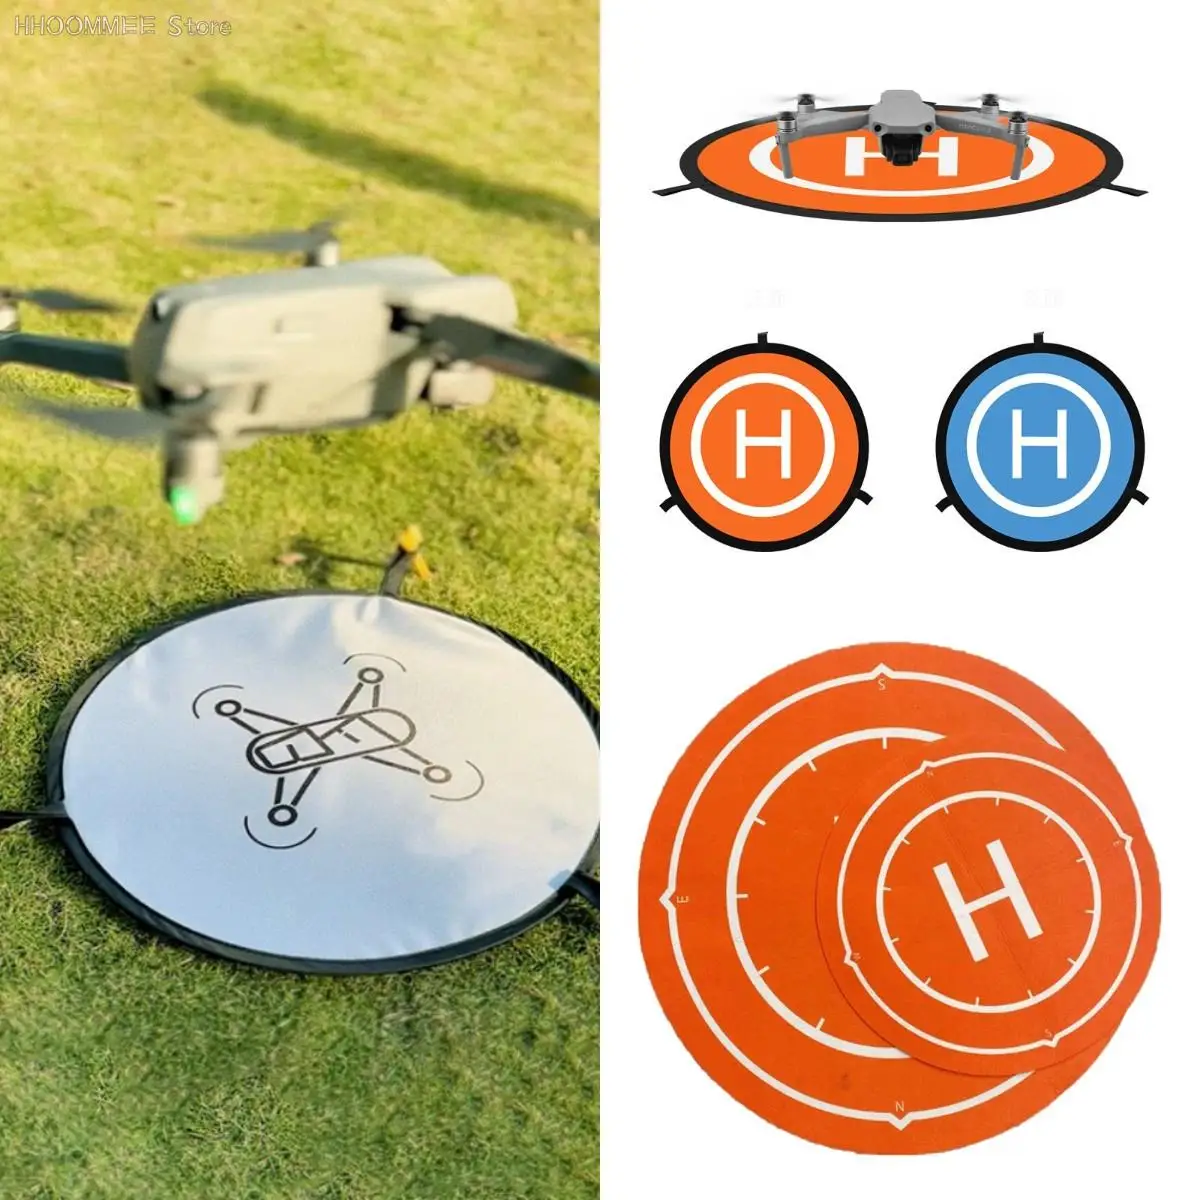 

40cm 50cm 55cm 60cm Foldable Landing Pads For Parking Apron for Outdoor Propeller Playing Drone Quadcopters Accessories 1pc